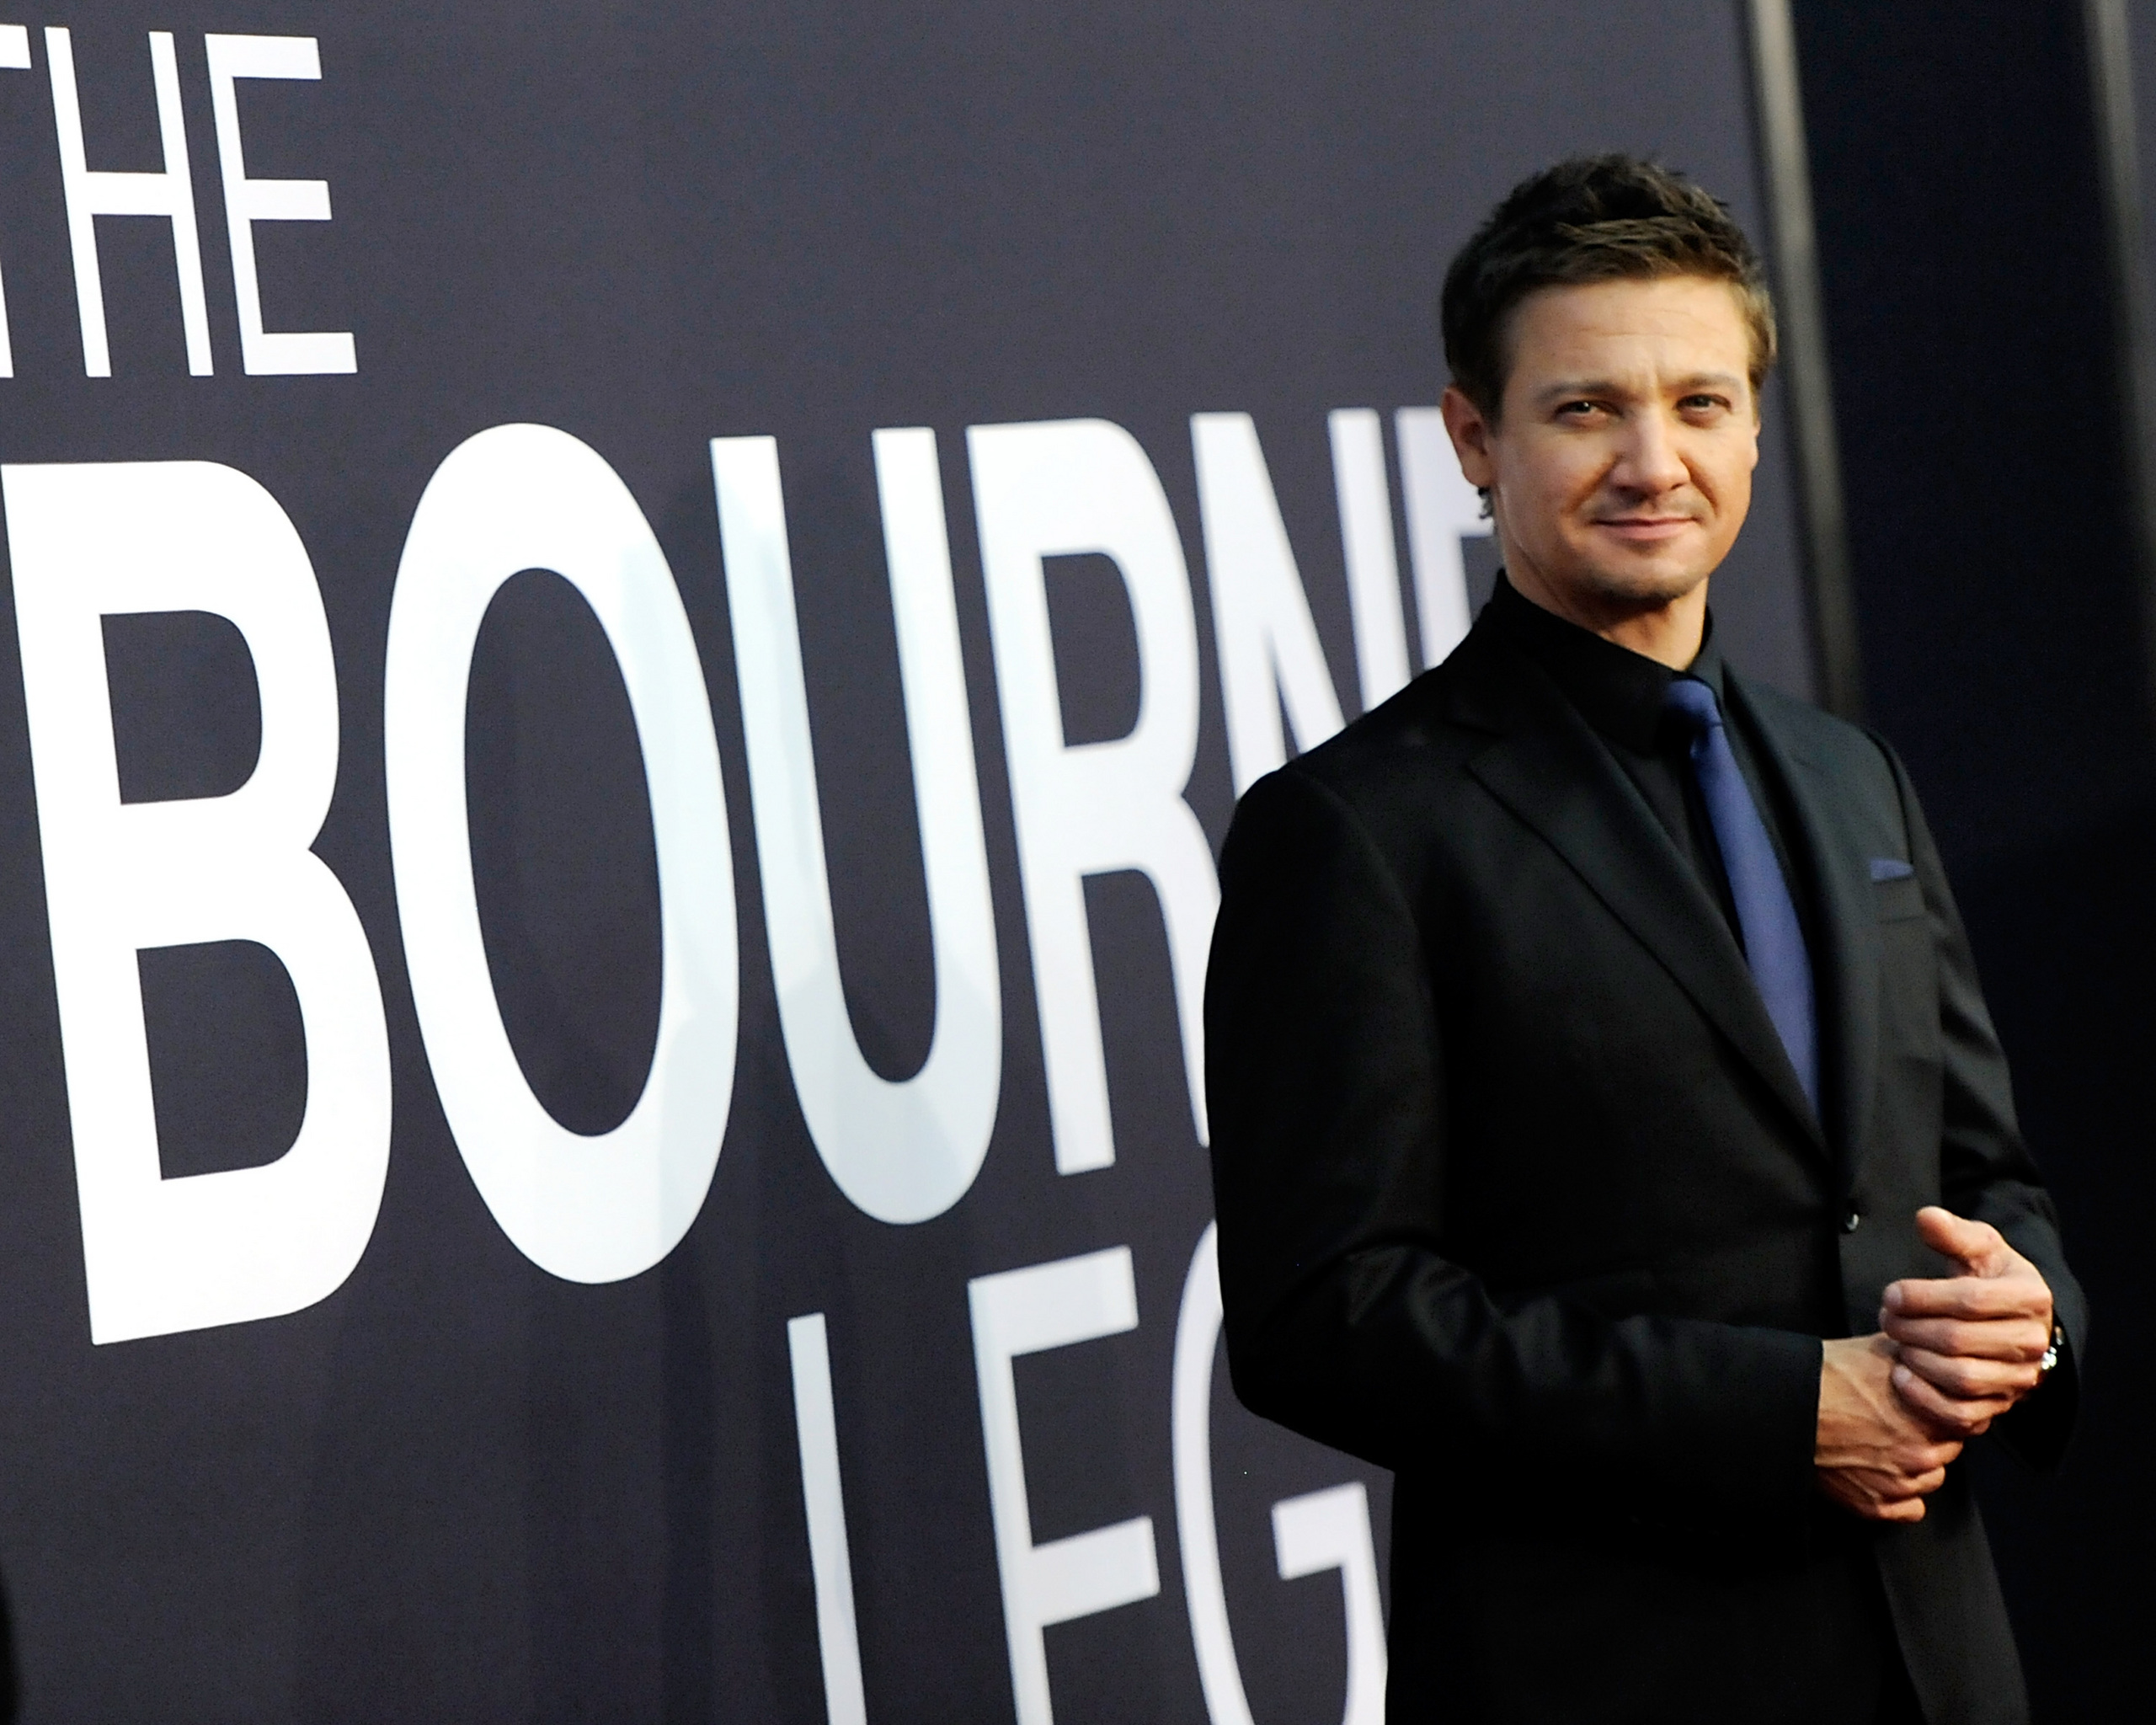 jeremy renner, images, image, wallpaper, photos, photo, photograph, gallery...